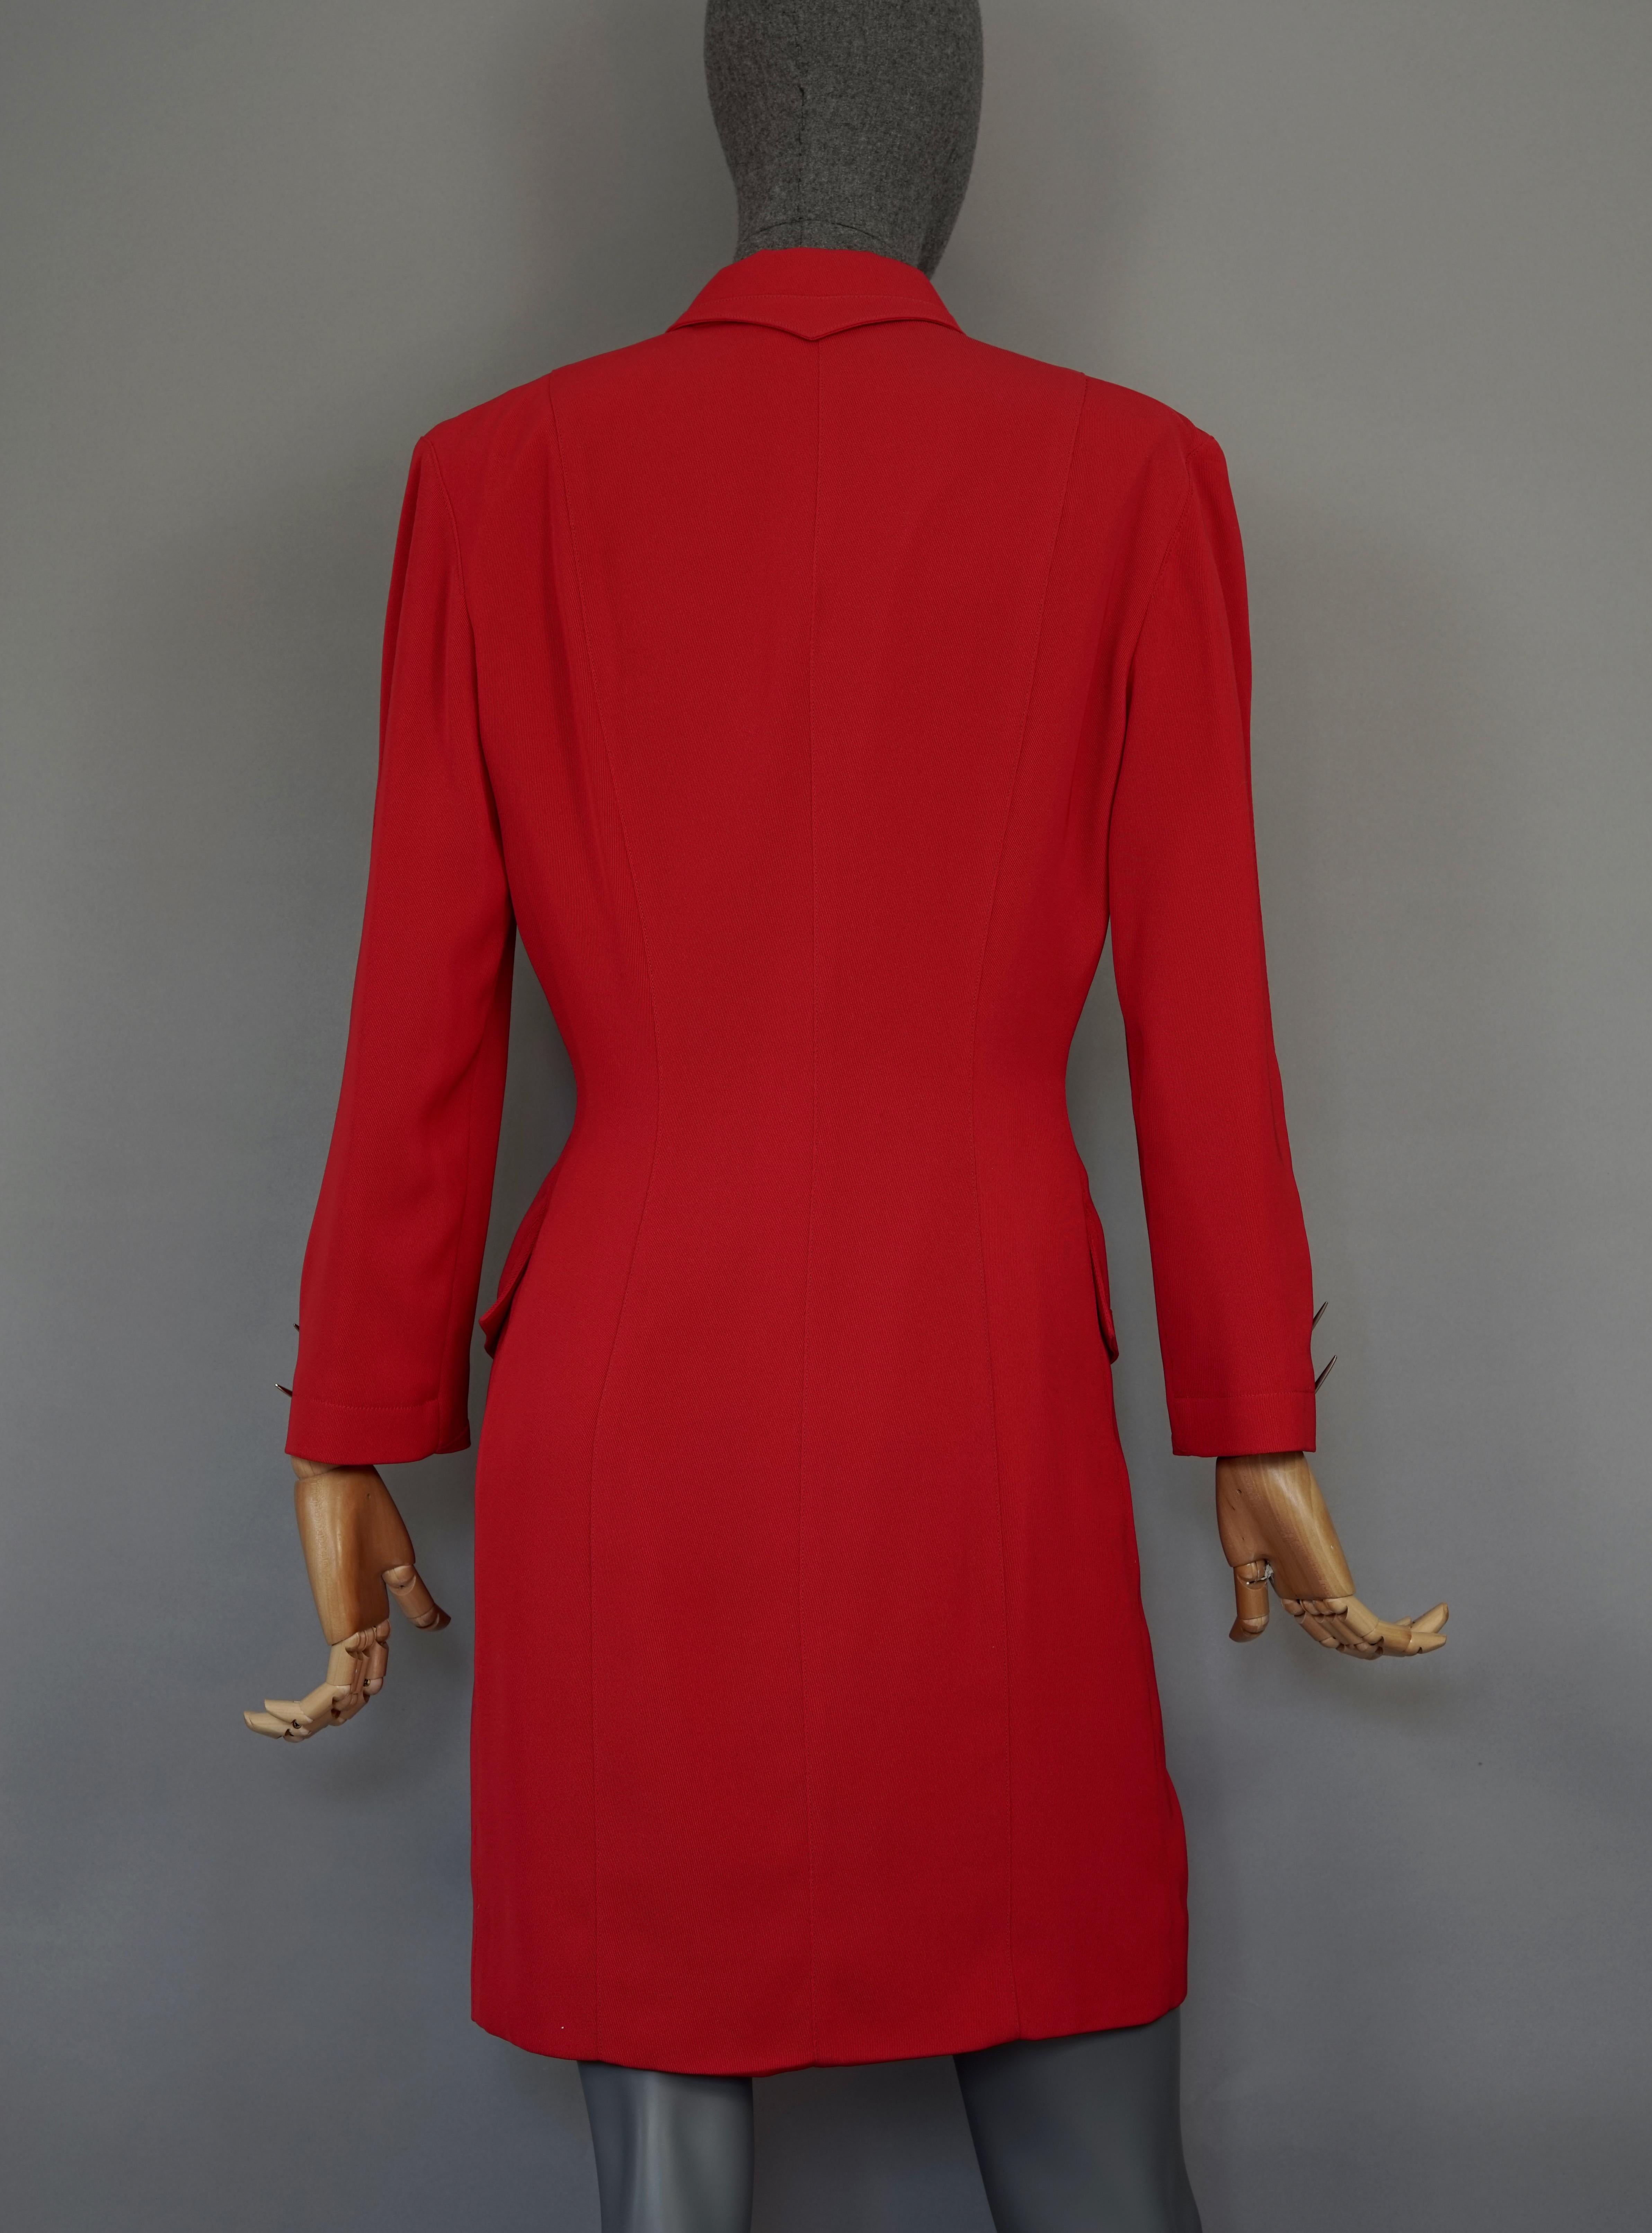 Vintage Iconic THIERRY MUGLER Silver Metal Hooks Futuristic Red Dress Suit In Excellent Condition For Sale In Kingersheim, Alsace